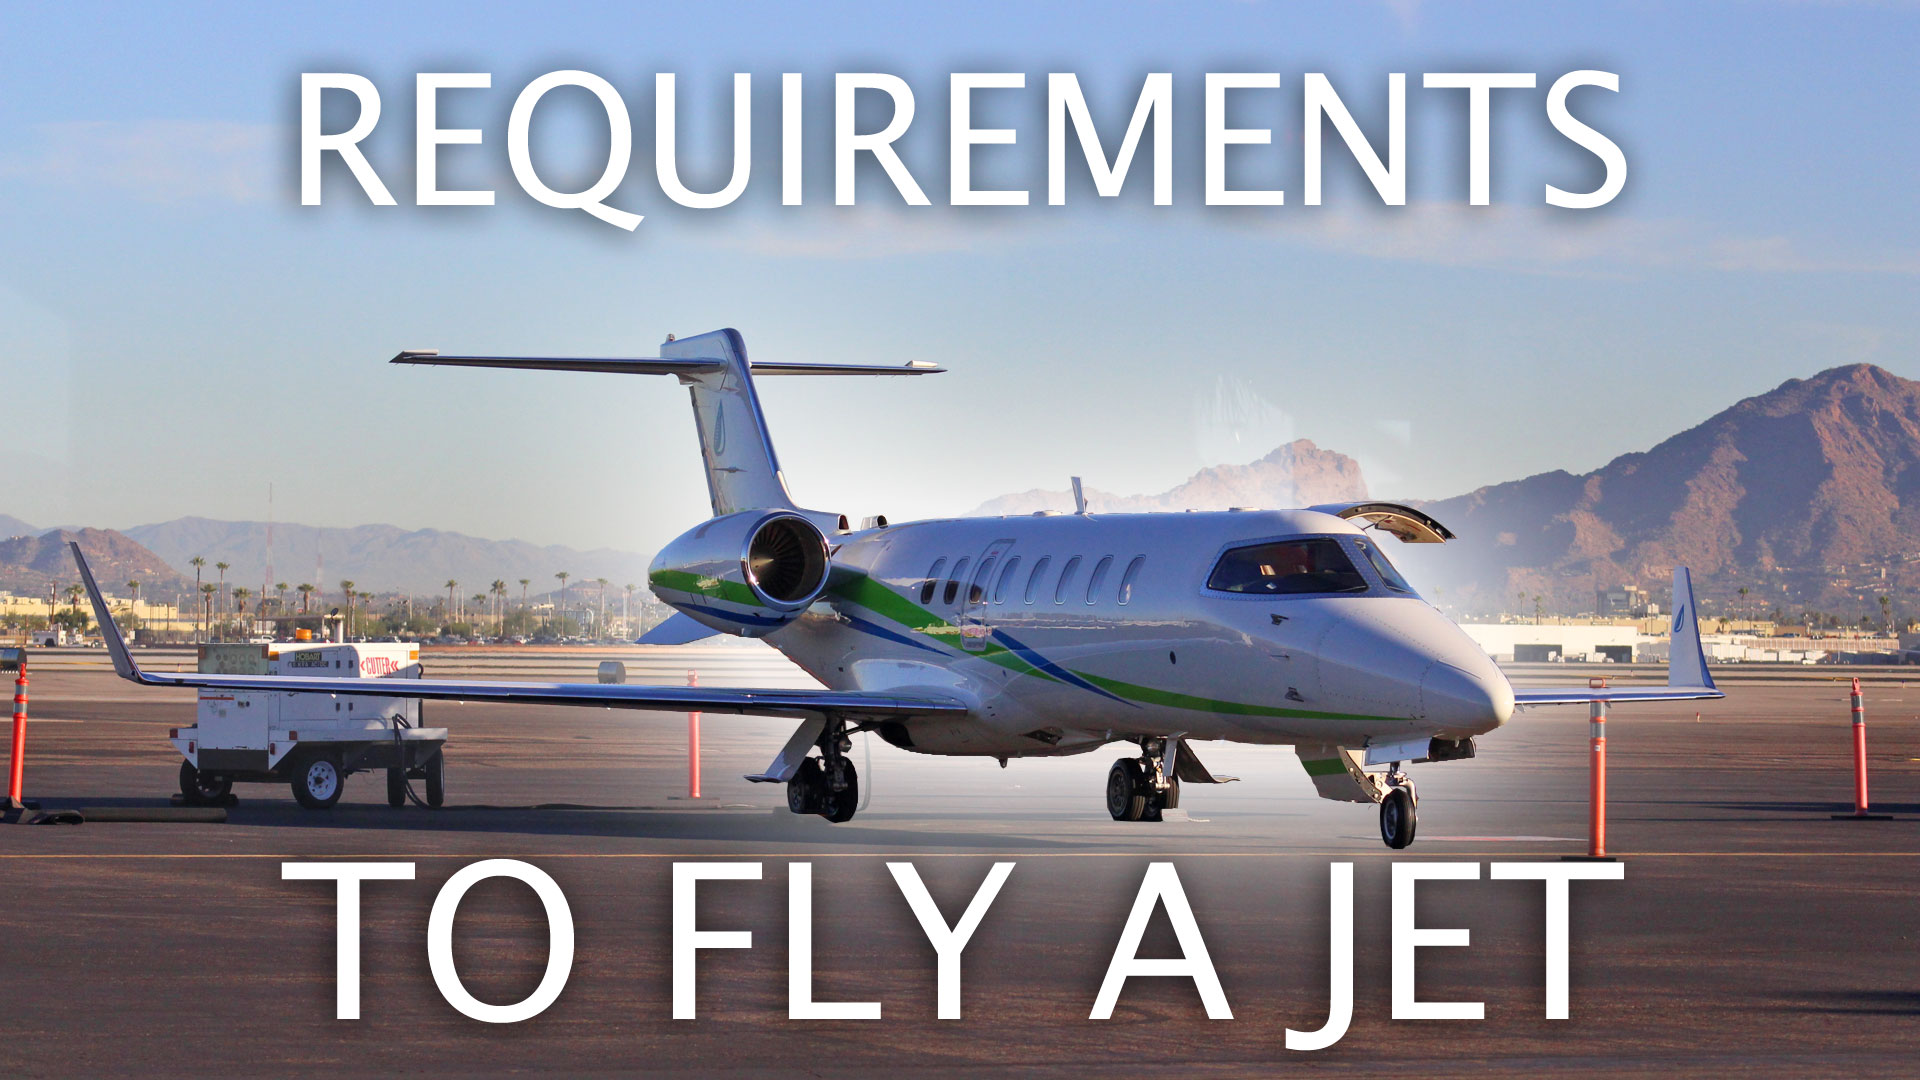 What Does It Take To Fly A Jet? How To Fly a Jet Required